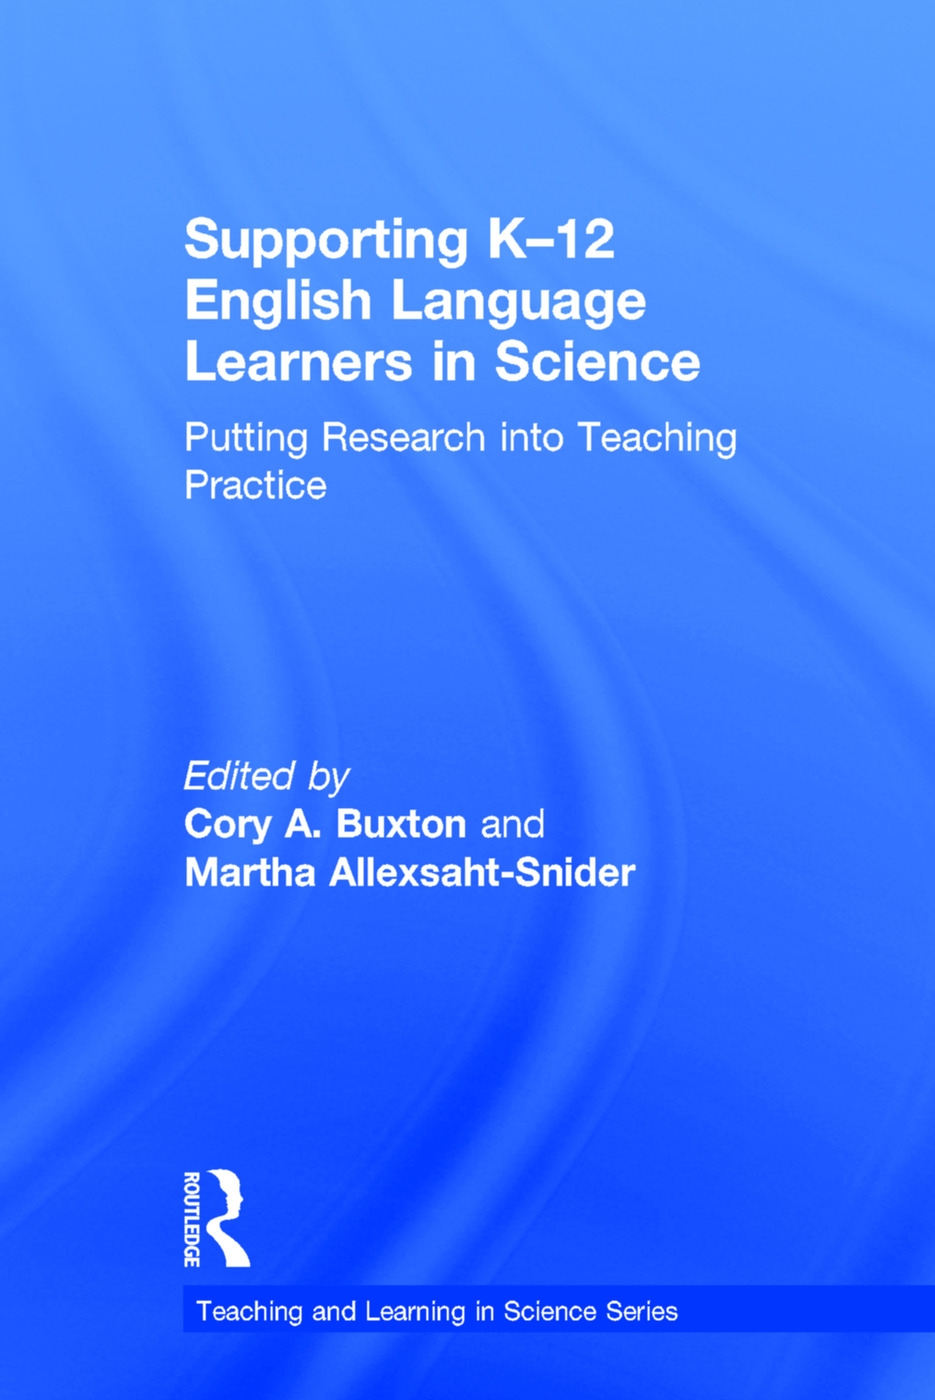 Supporting K-12 English Language Learners in Science: Putting Research Into Teaching Practice